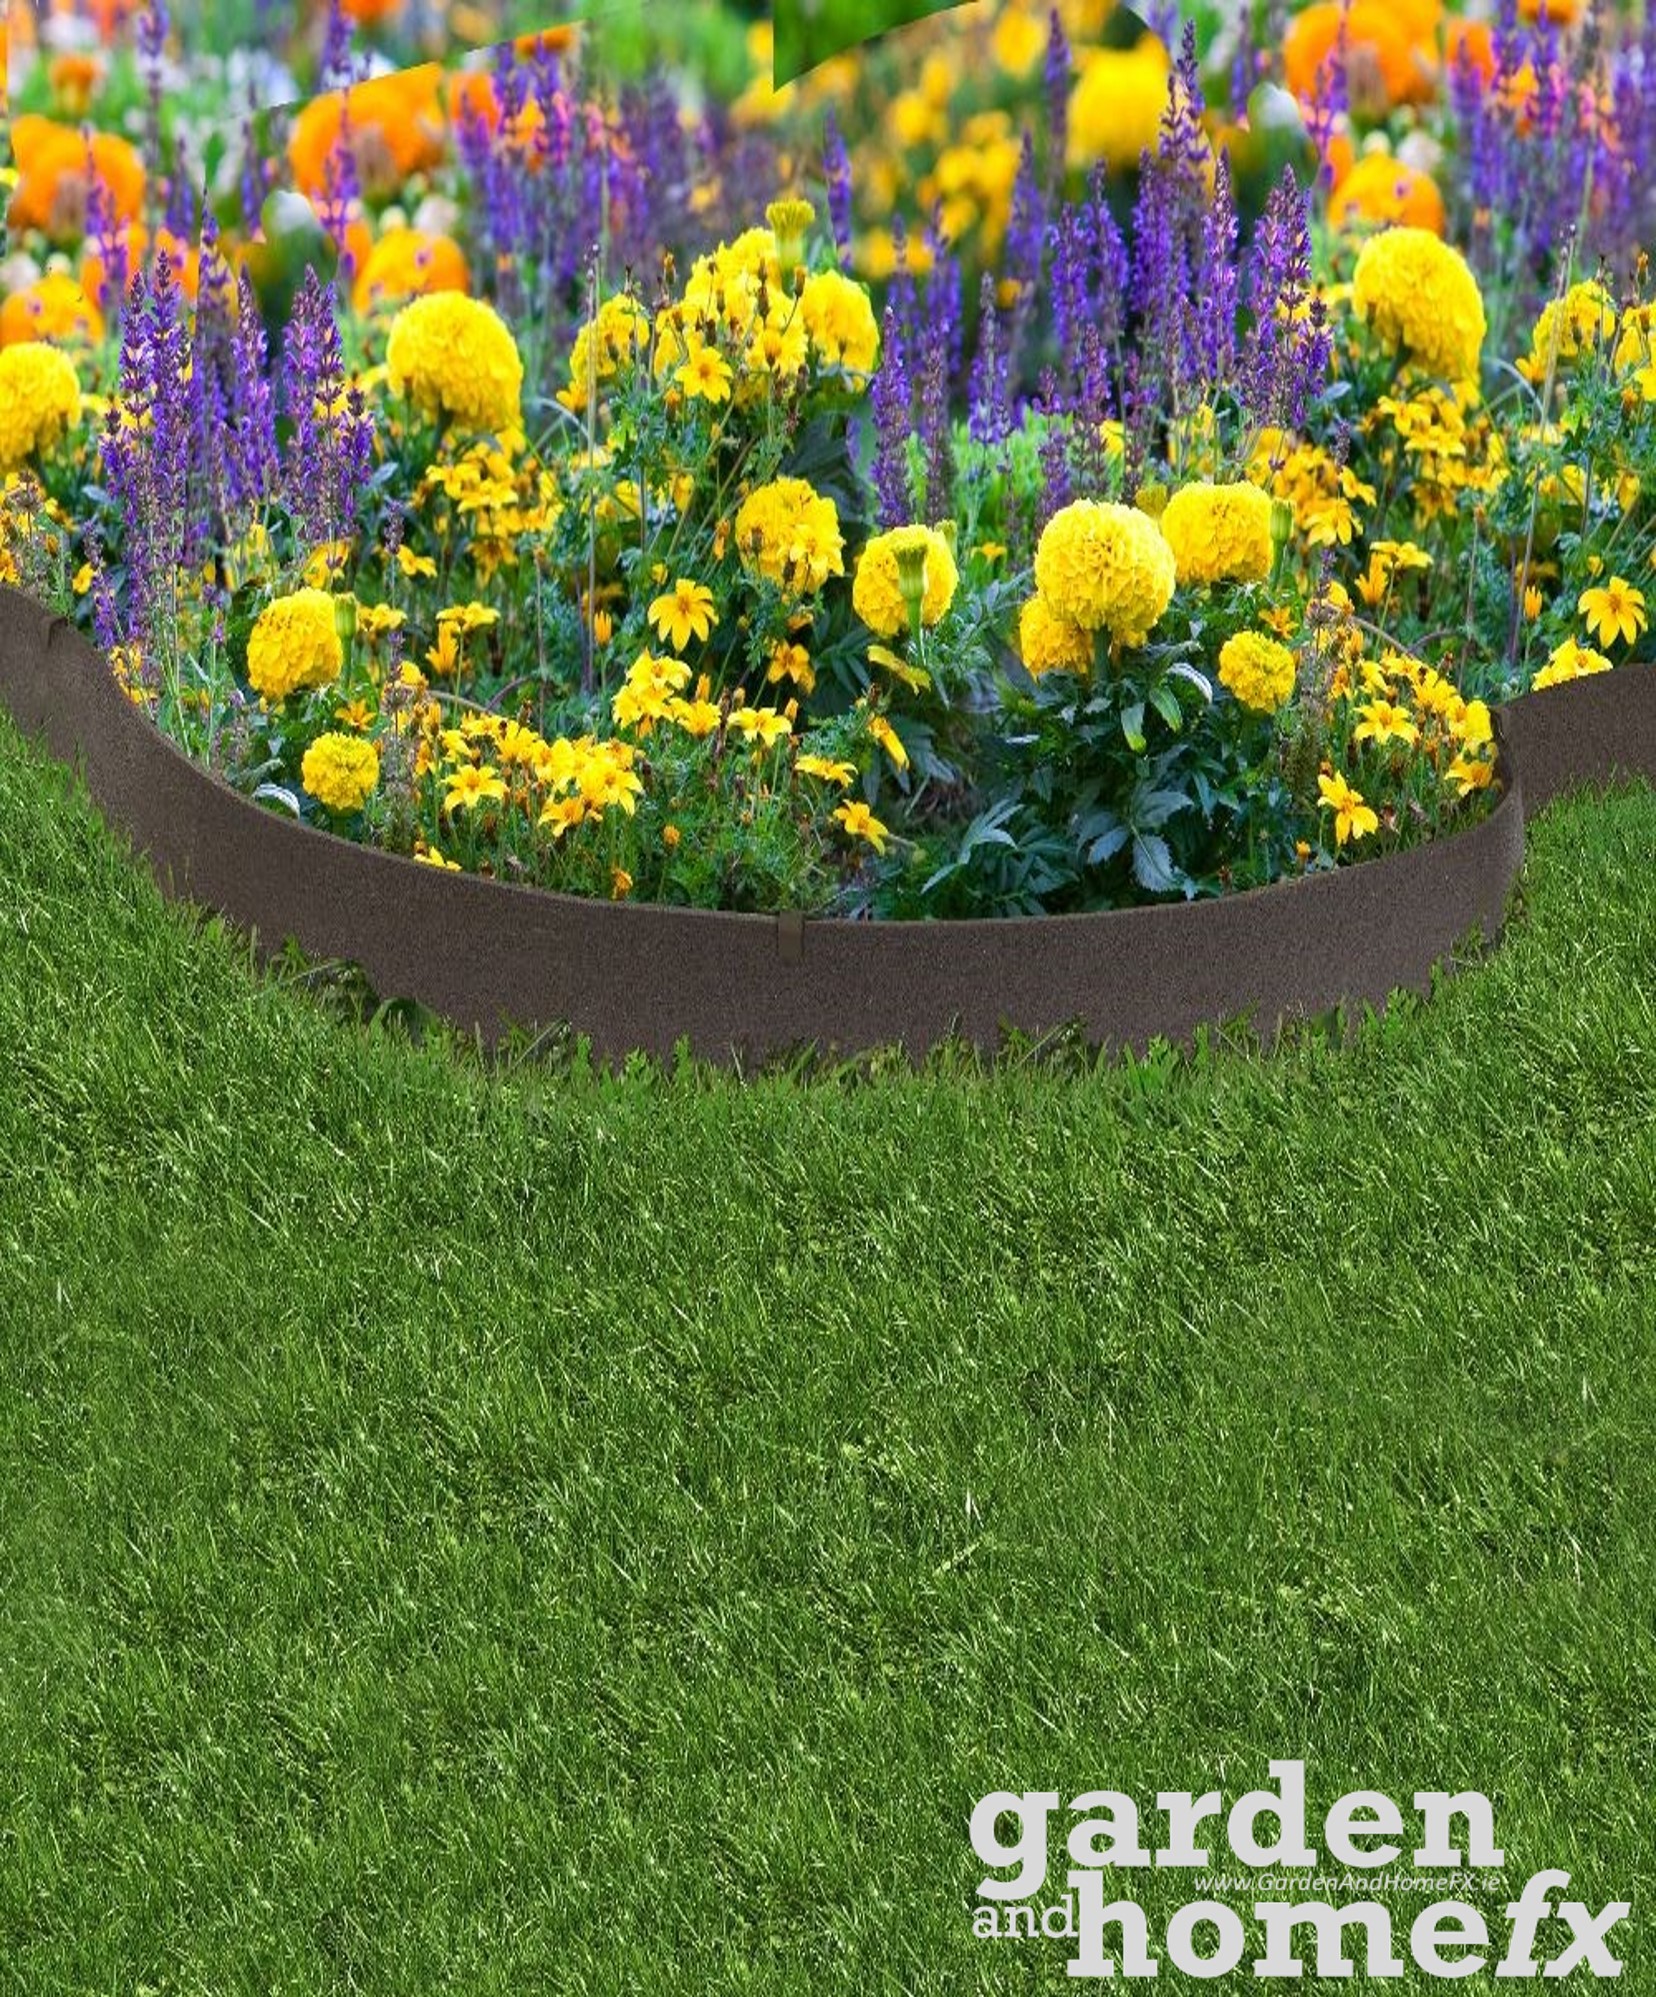 Ultra Flexi Curve "EZ Border" Thin Line Garden Lawn Edgeing made from Recycled Rubber Car Tyres, Supplied in Ireland.